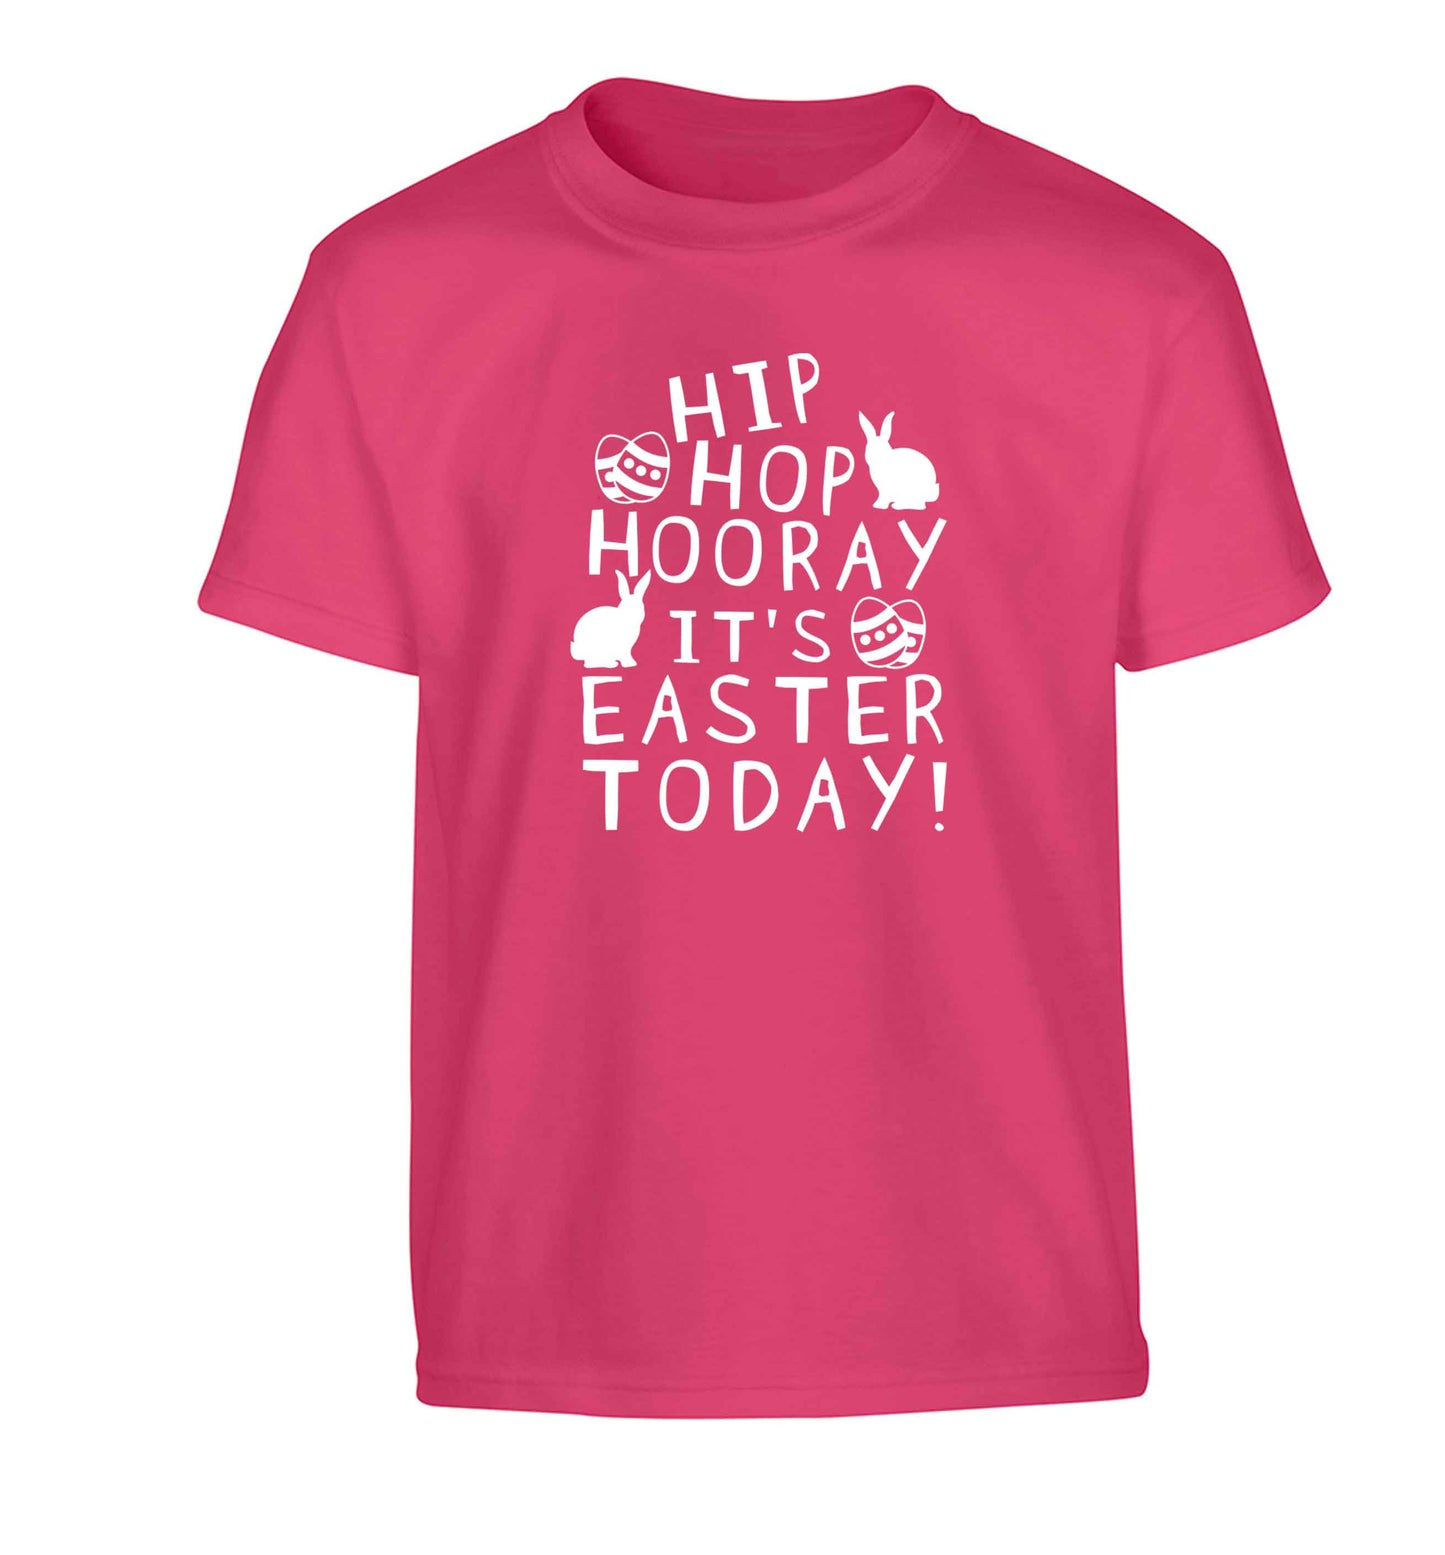 Hip hip hooray it's Easter today! Children's pink Tshirt 12-13 Years